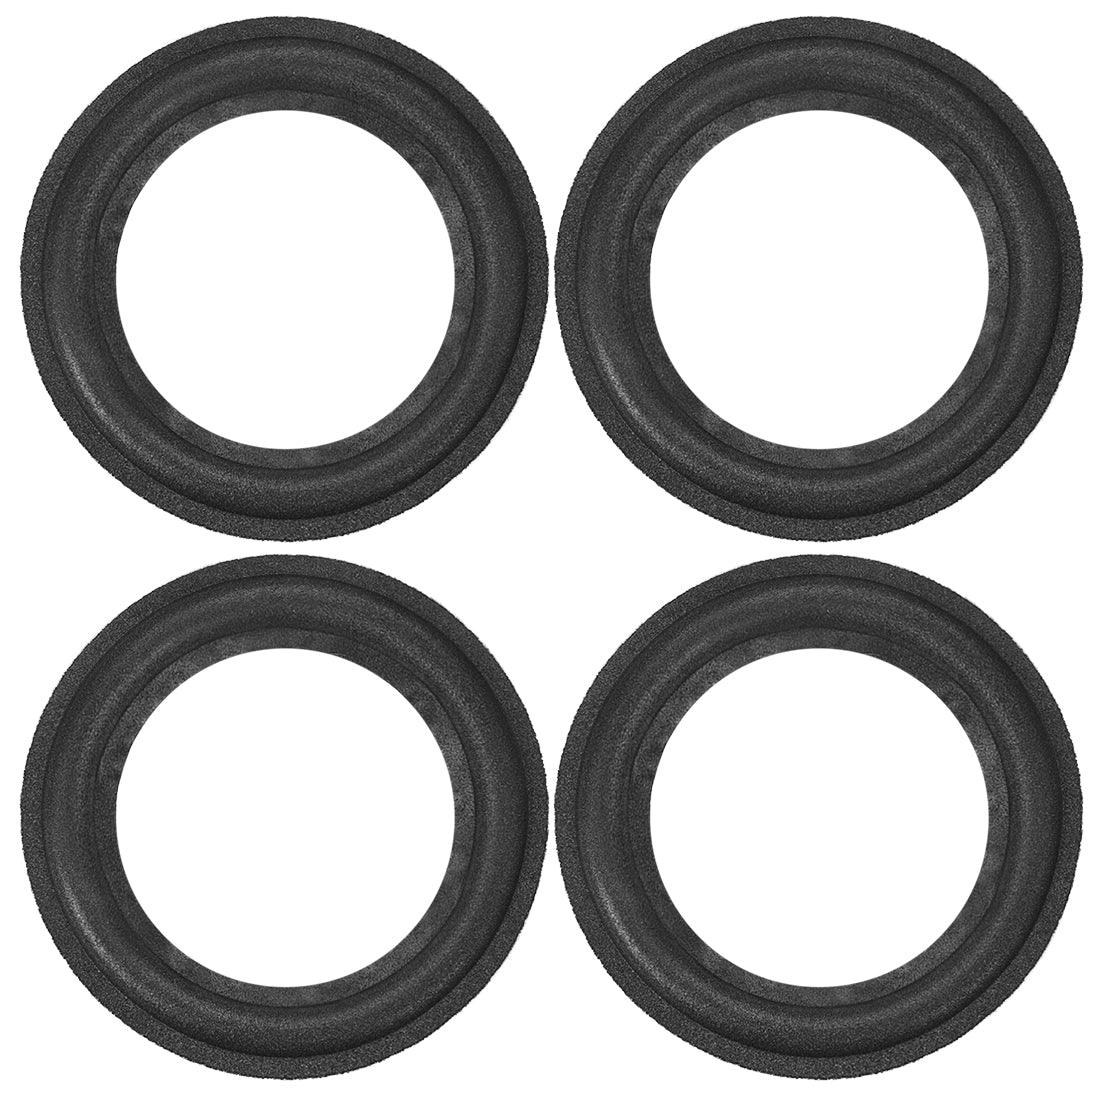 uxcell Uxcell 4" Inch Foam Edge Folding Ring  Horn Replacement Parts for Black   4Pcs